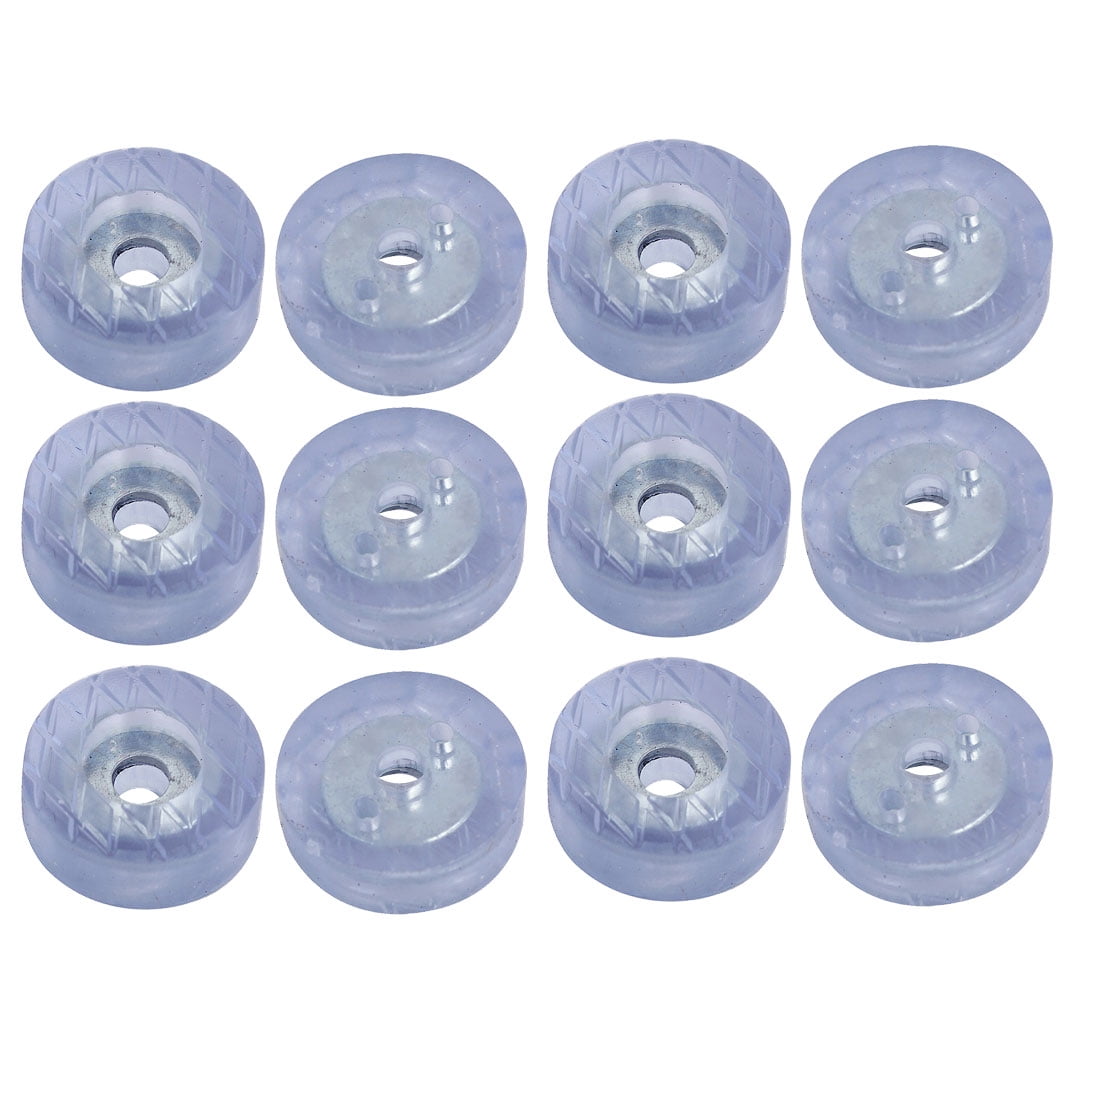 20mmx7mm Rubber Cone Shaped Furniture Leg Foot Protectors Pads Clear Blue 12pcs 